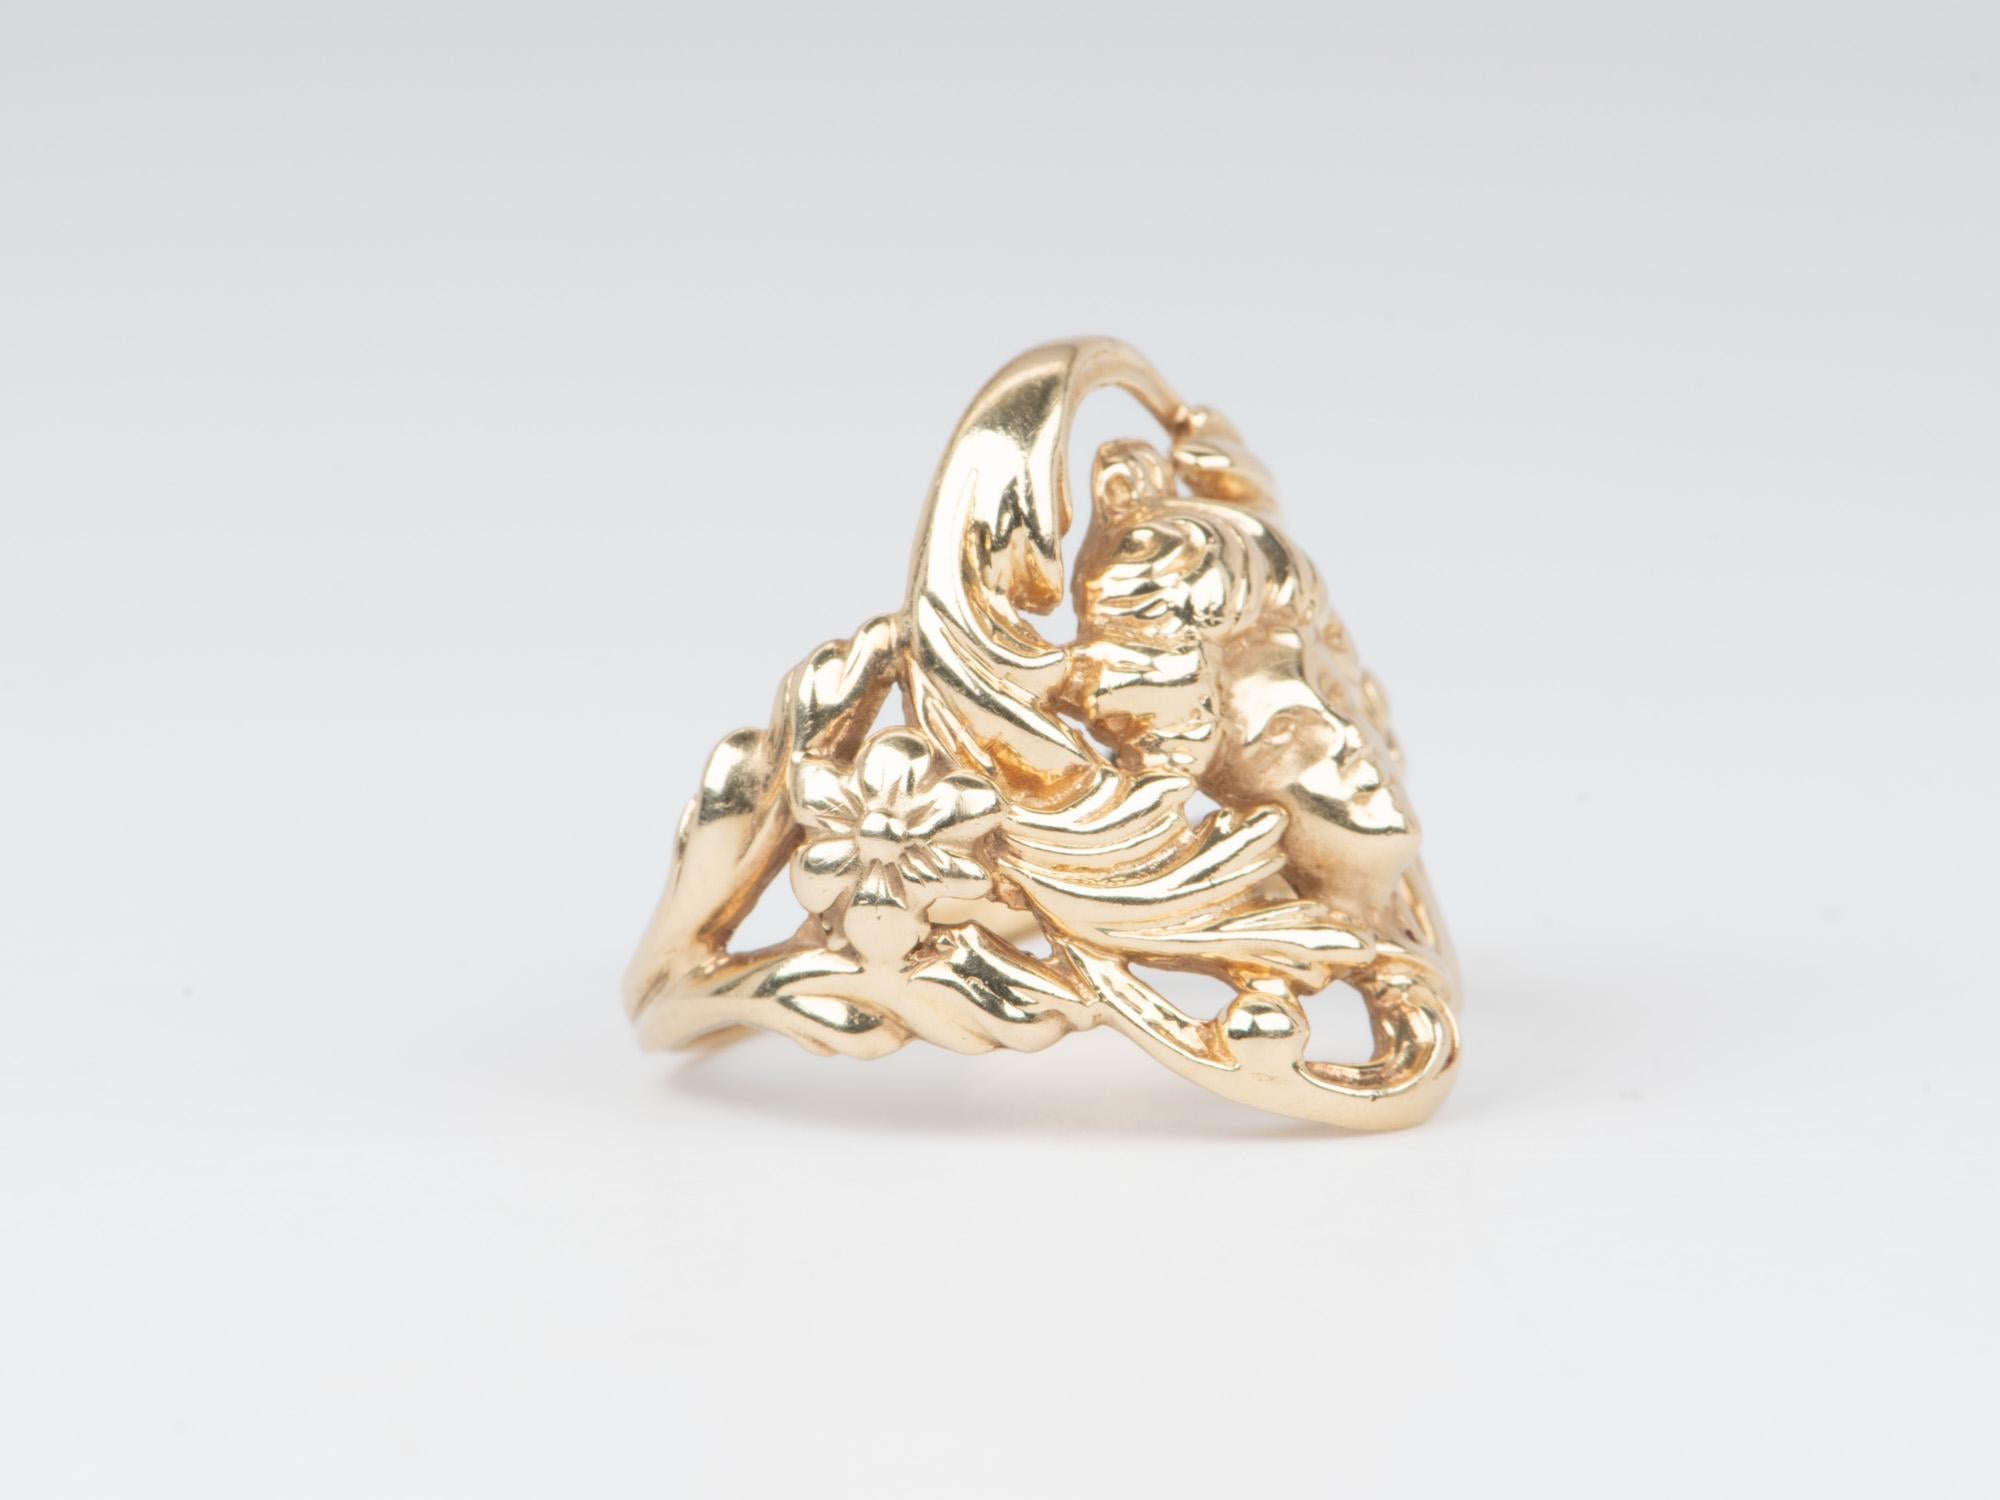 Vintage Jewelry Art Nouveau Floral Woman Ring 14K Gold 7g In New Condition For Sale In Osprey, FL